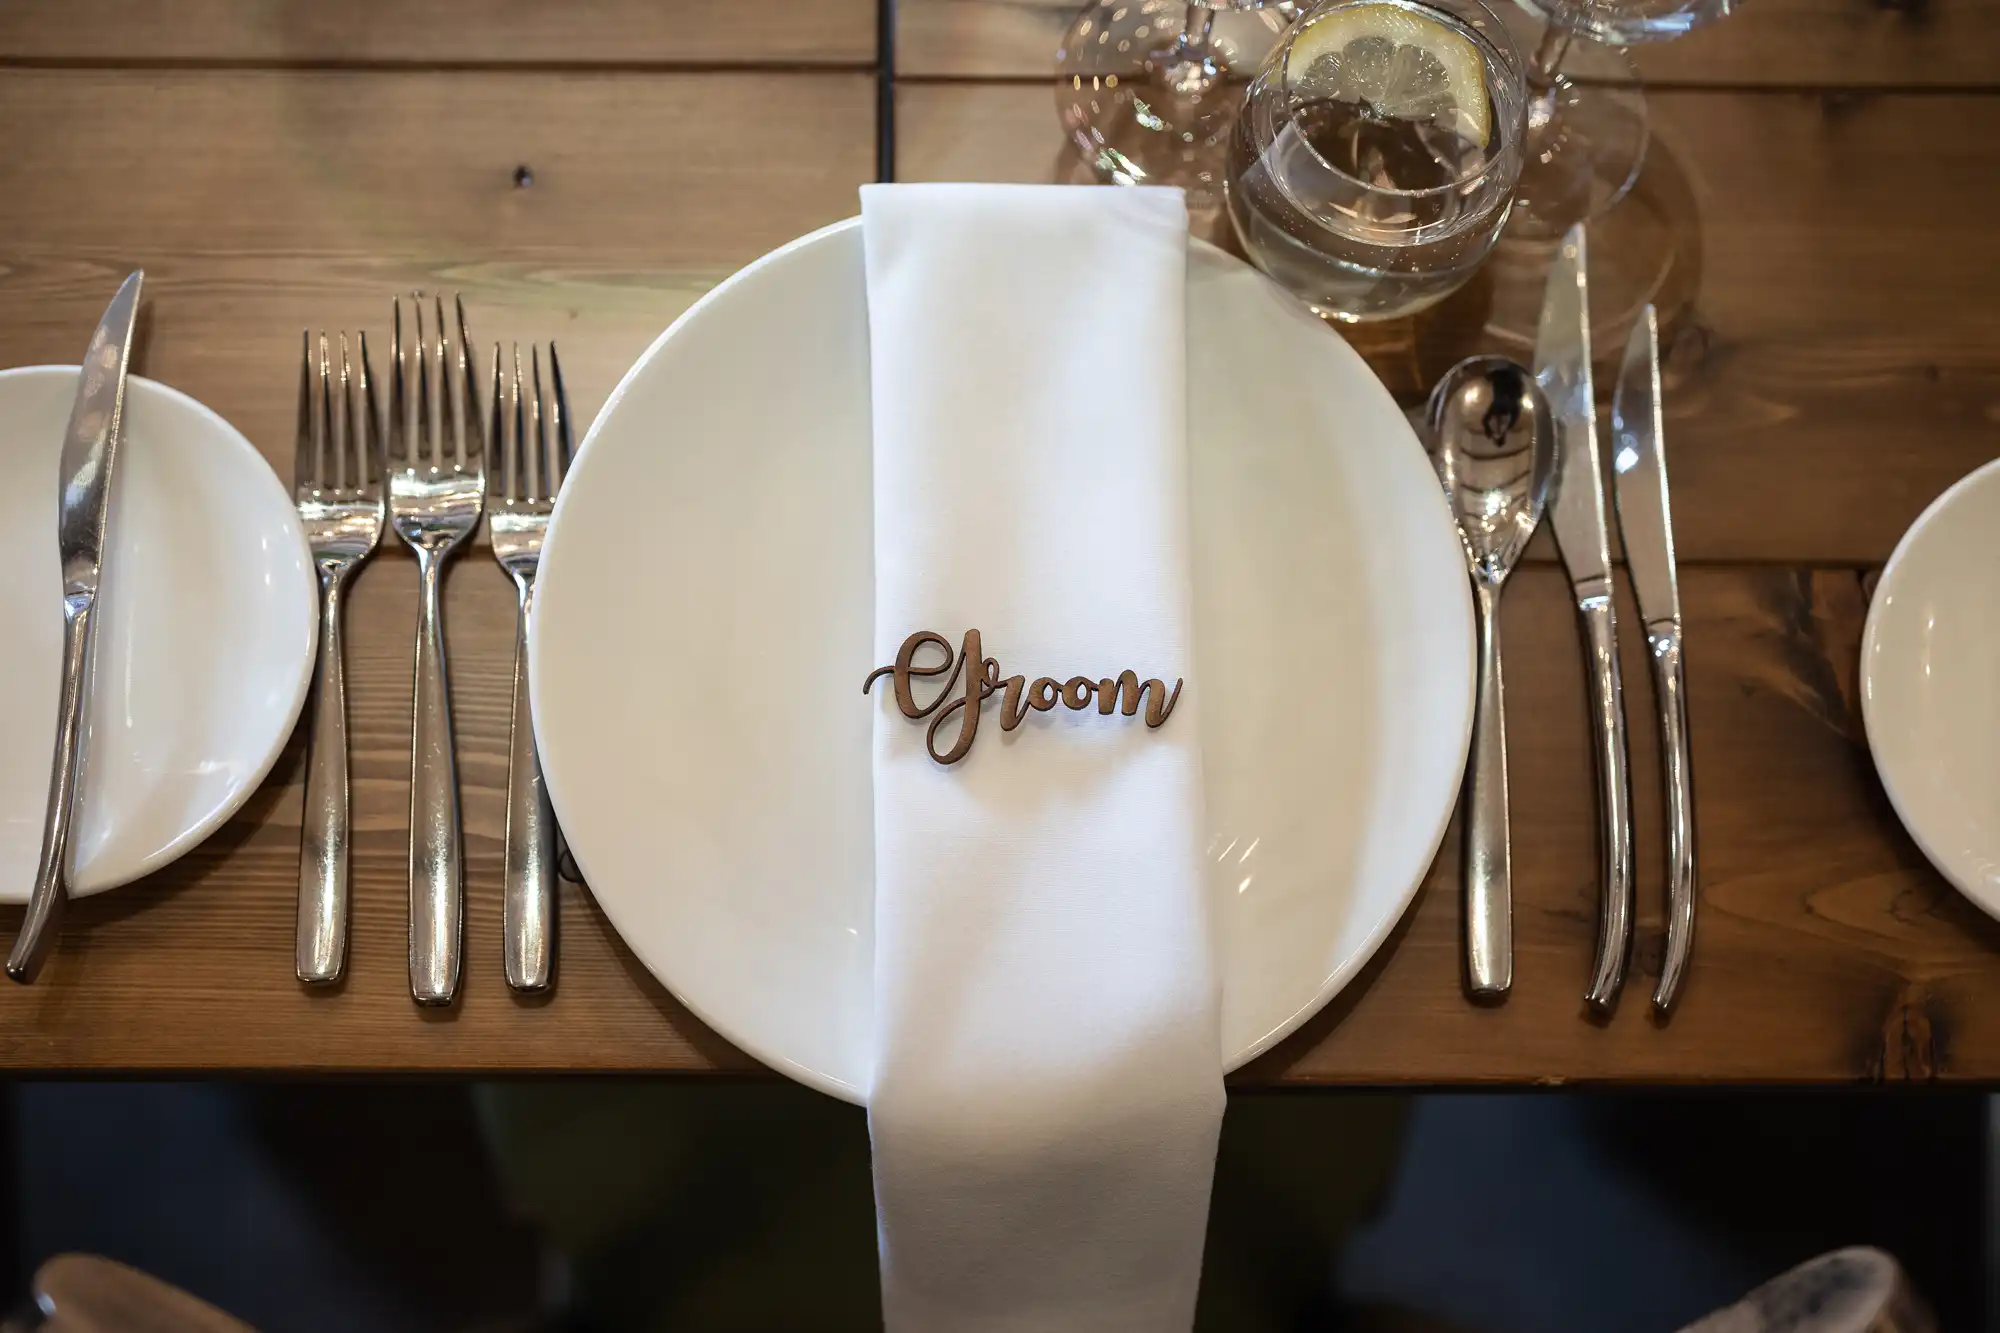 Elegant wedding table setting with a "Groom" place setting marker on a folded white napkin, surrounded by silverware and a glass on a wooden table.